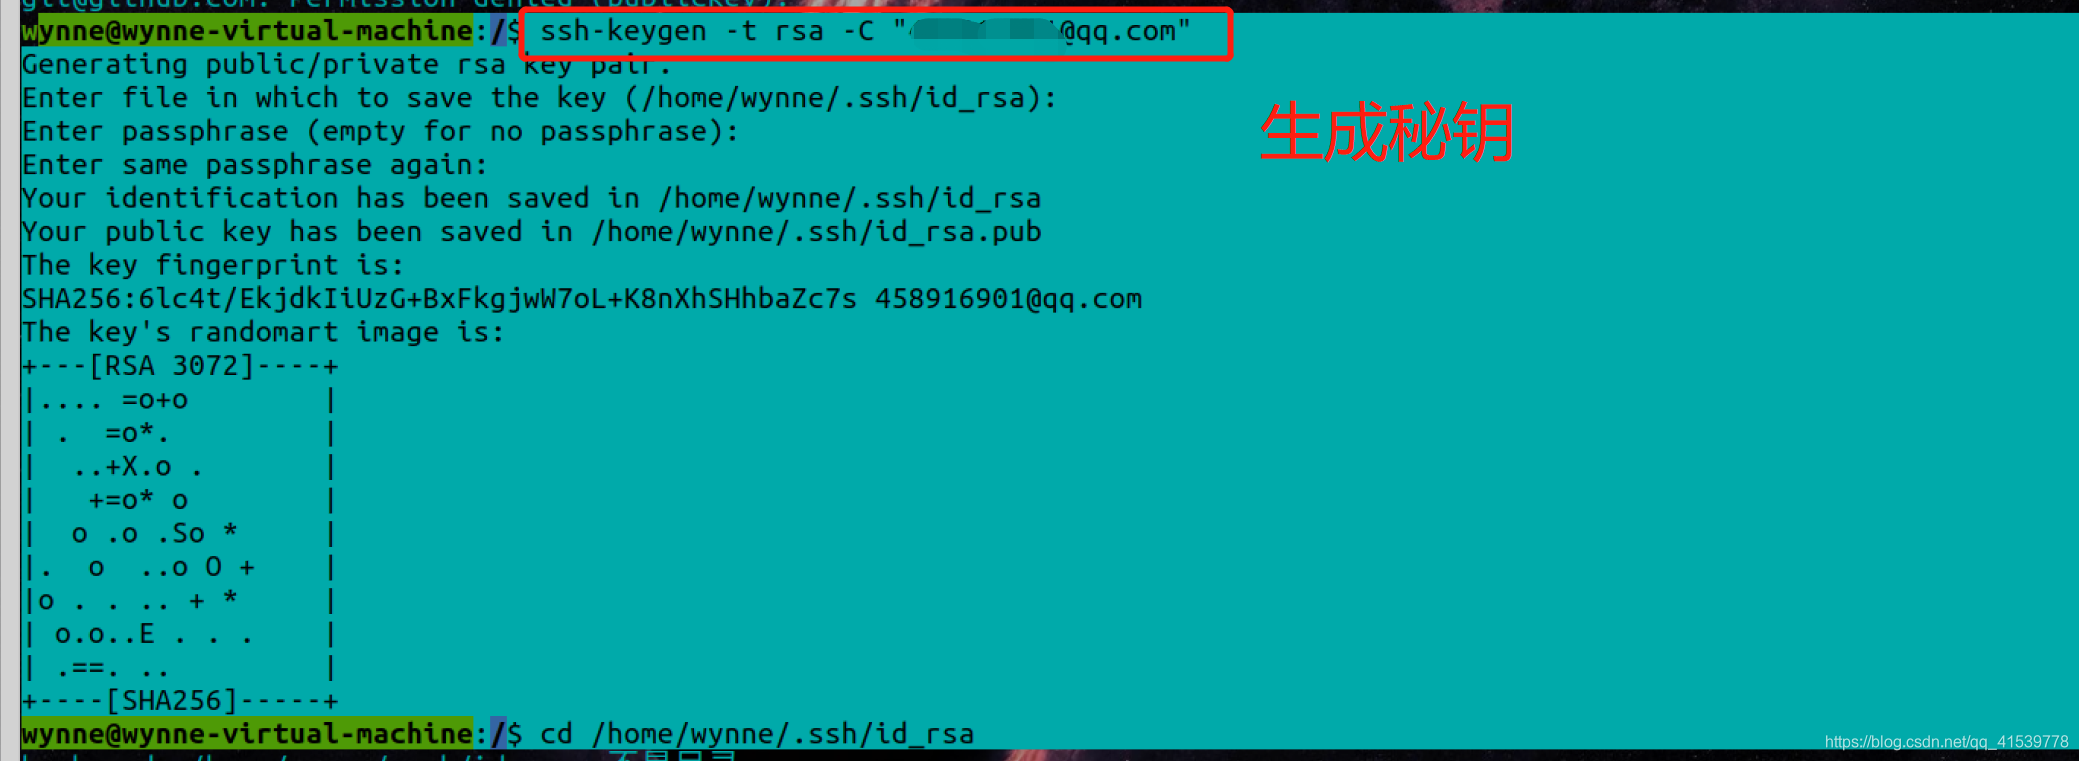 Linux下的github 添加秘钥出错：Key is invalid. You must supply a key in OpenSSH public key for